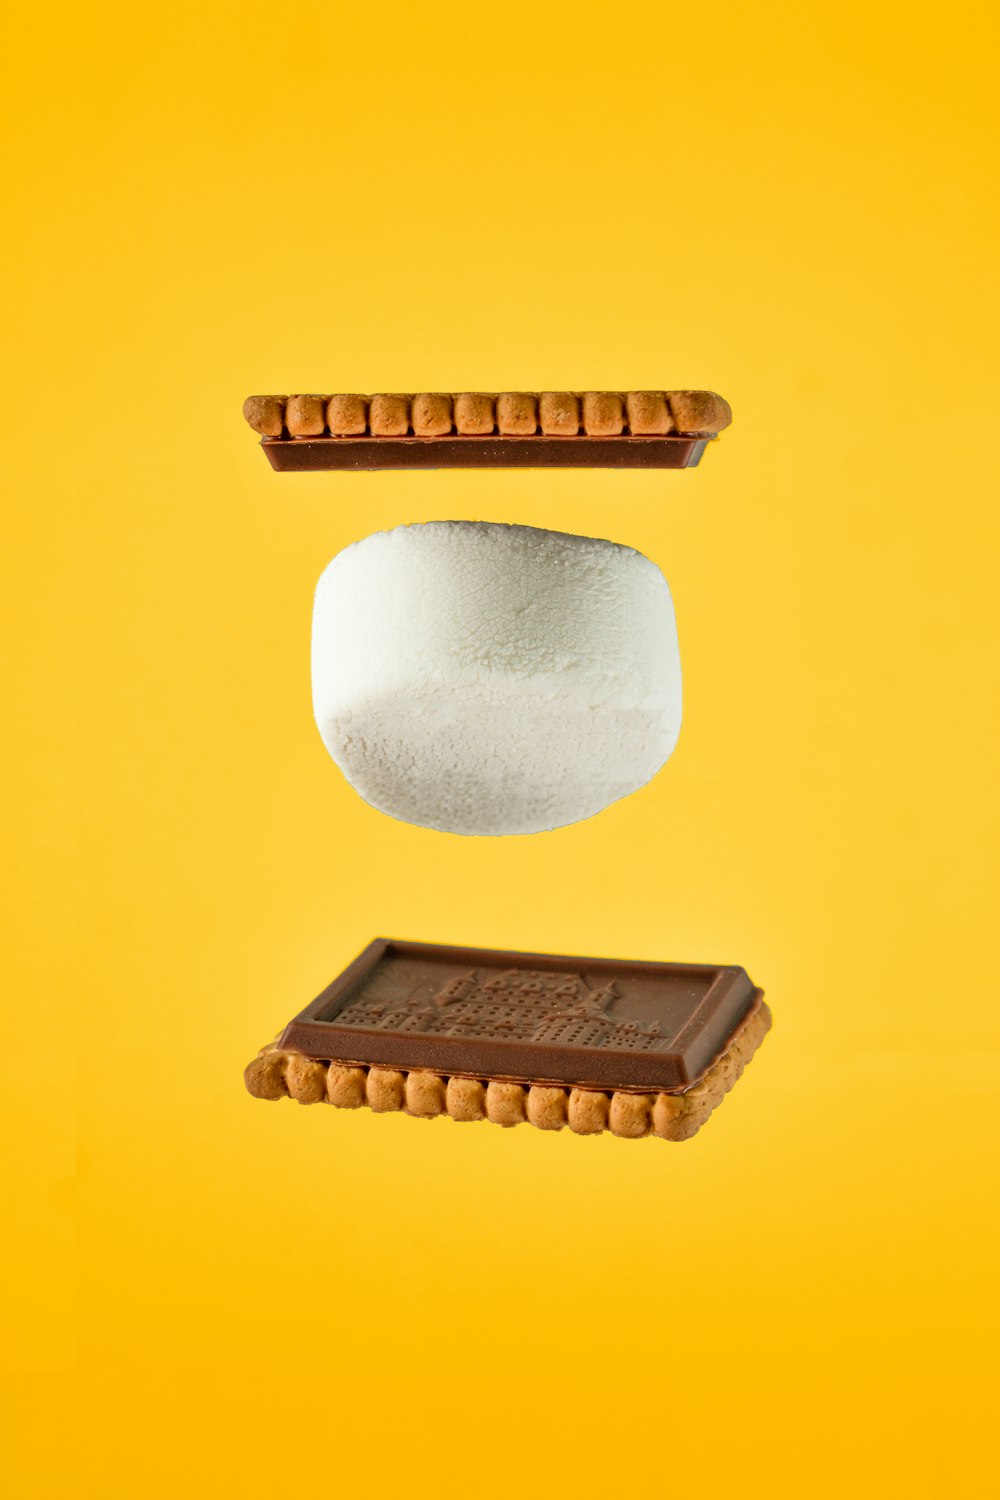 two pills and a bar of chocolate on a yellow background